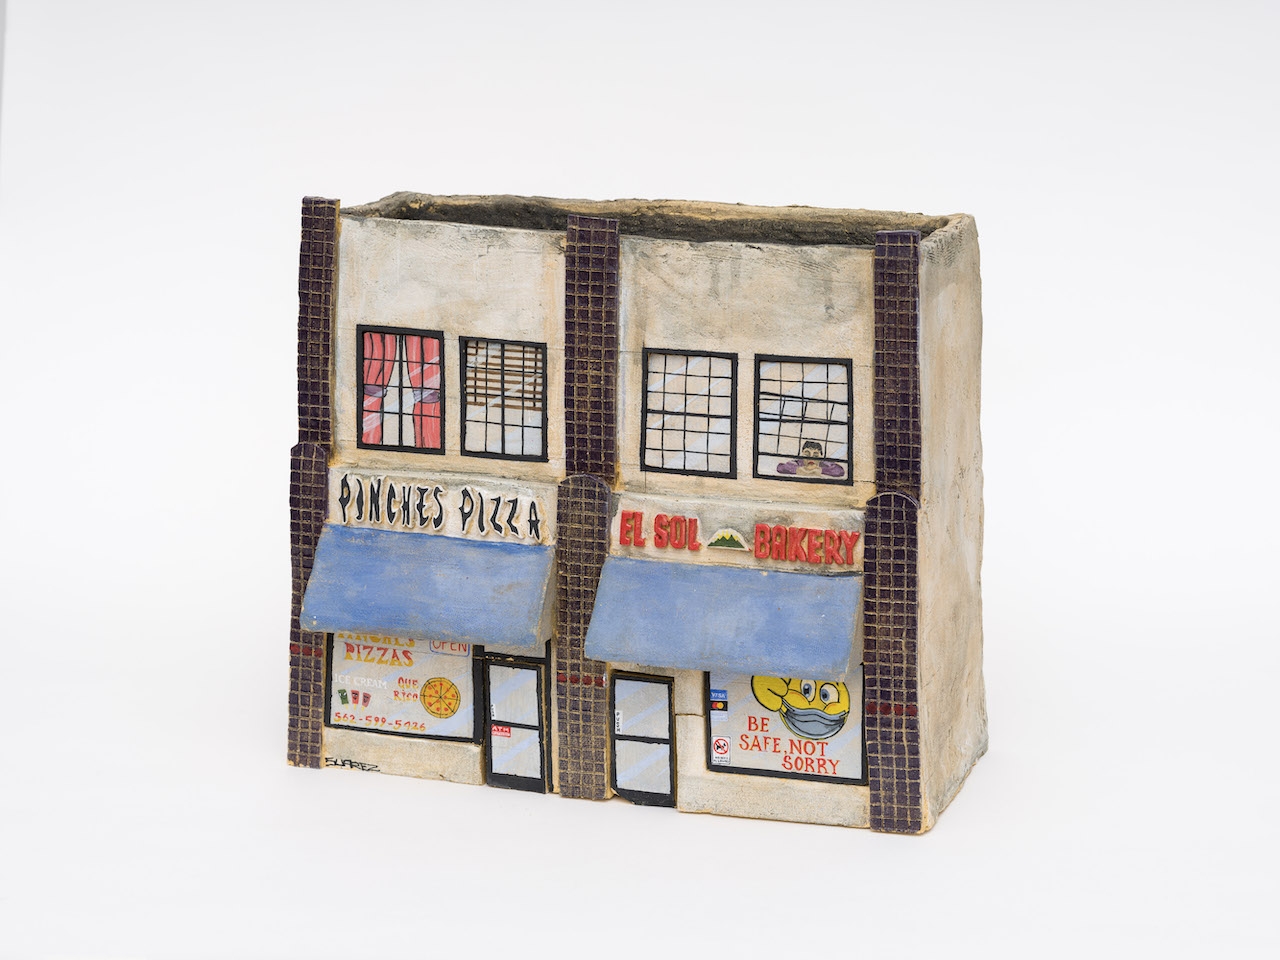 Ceramic reproduction of a storefront building with Pinche's Pizza.